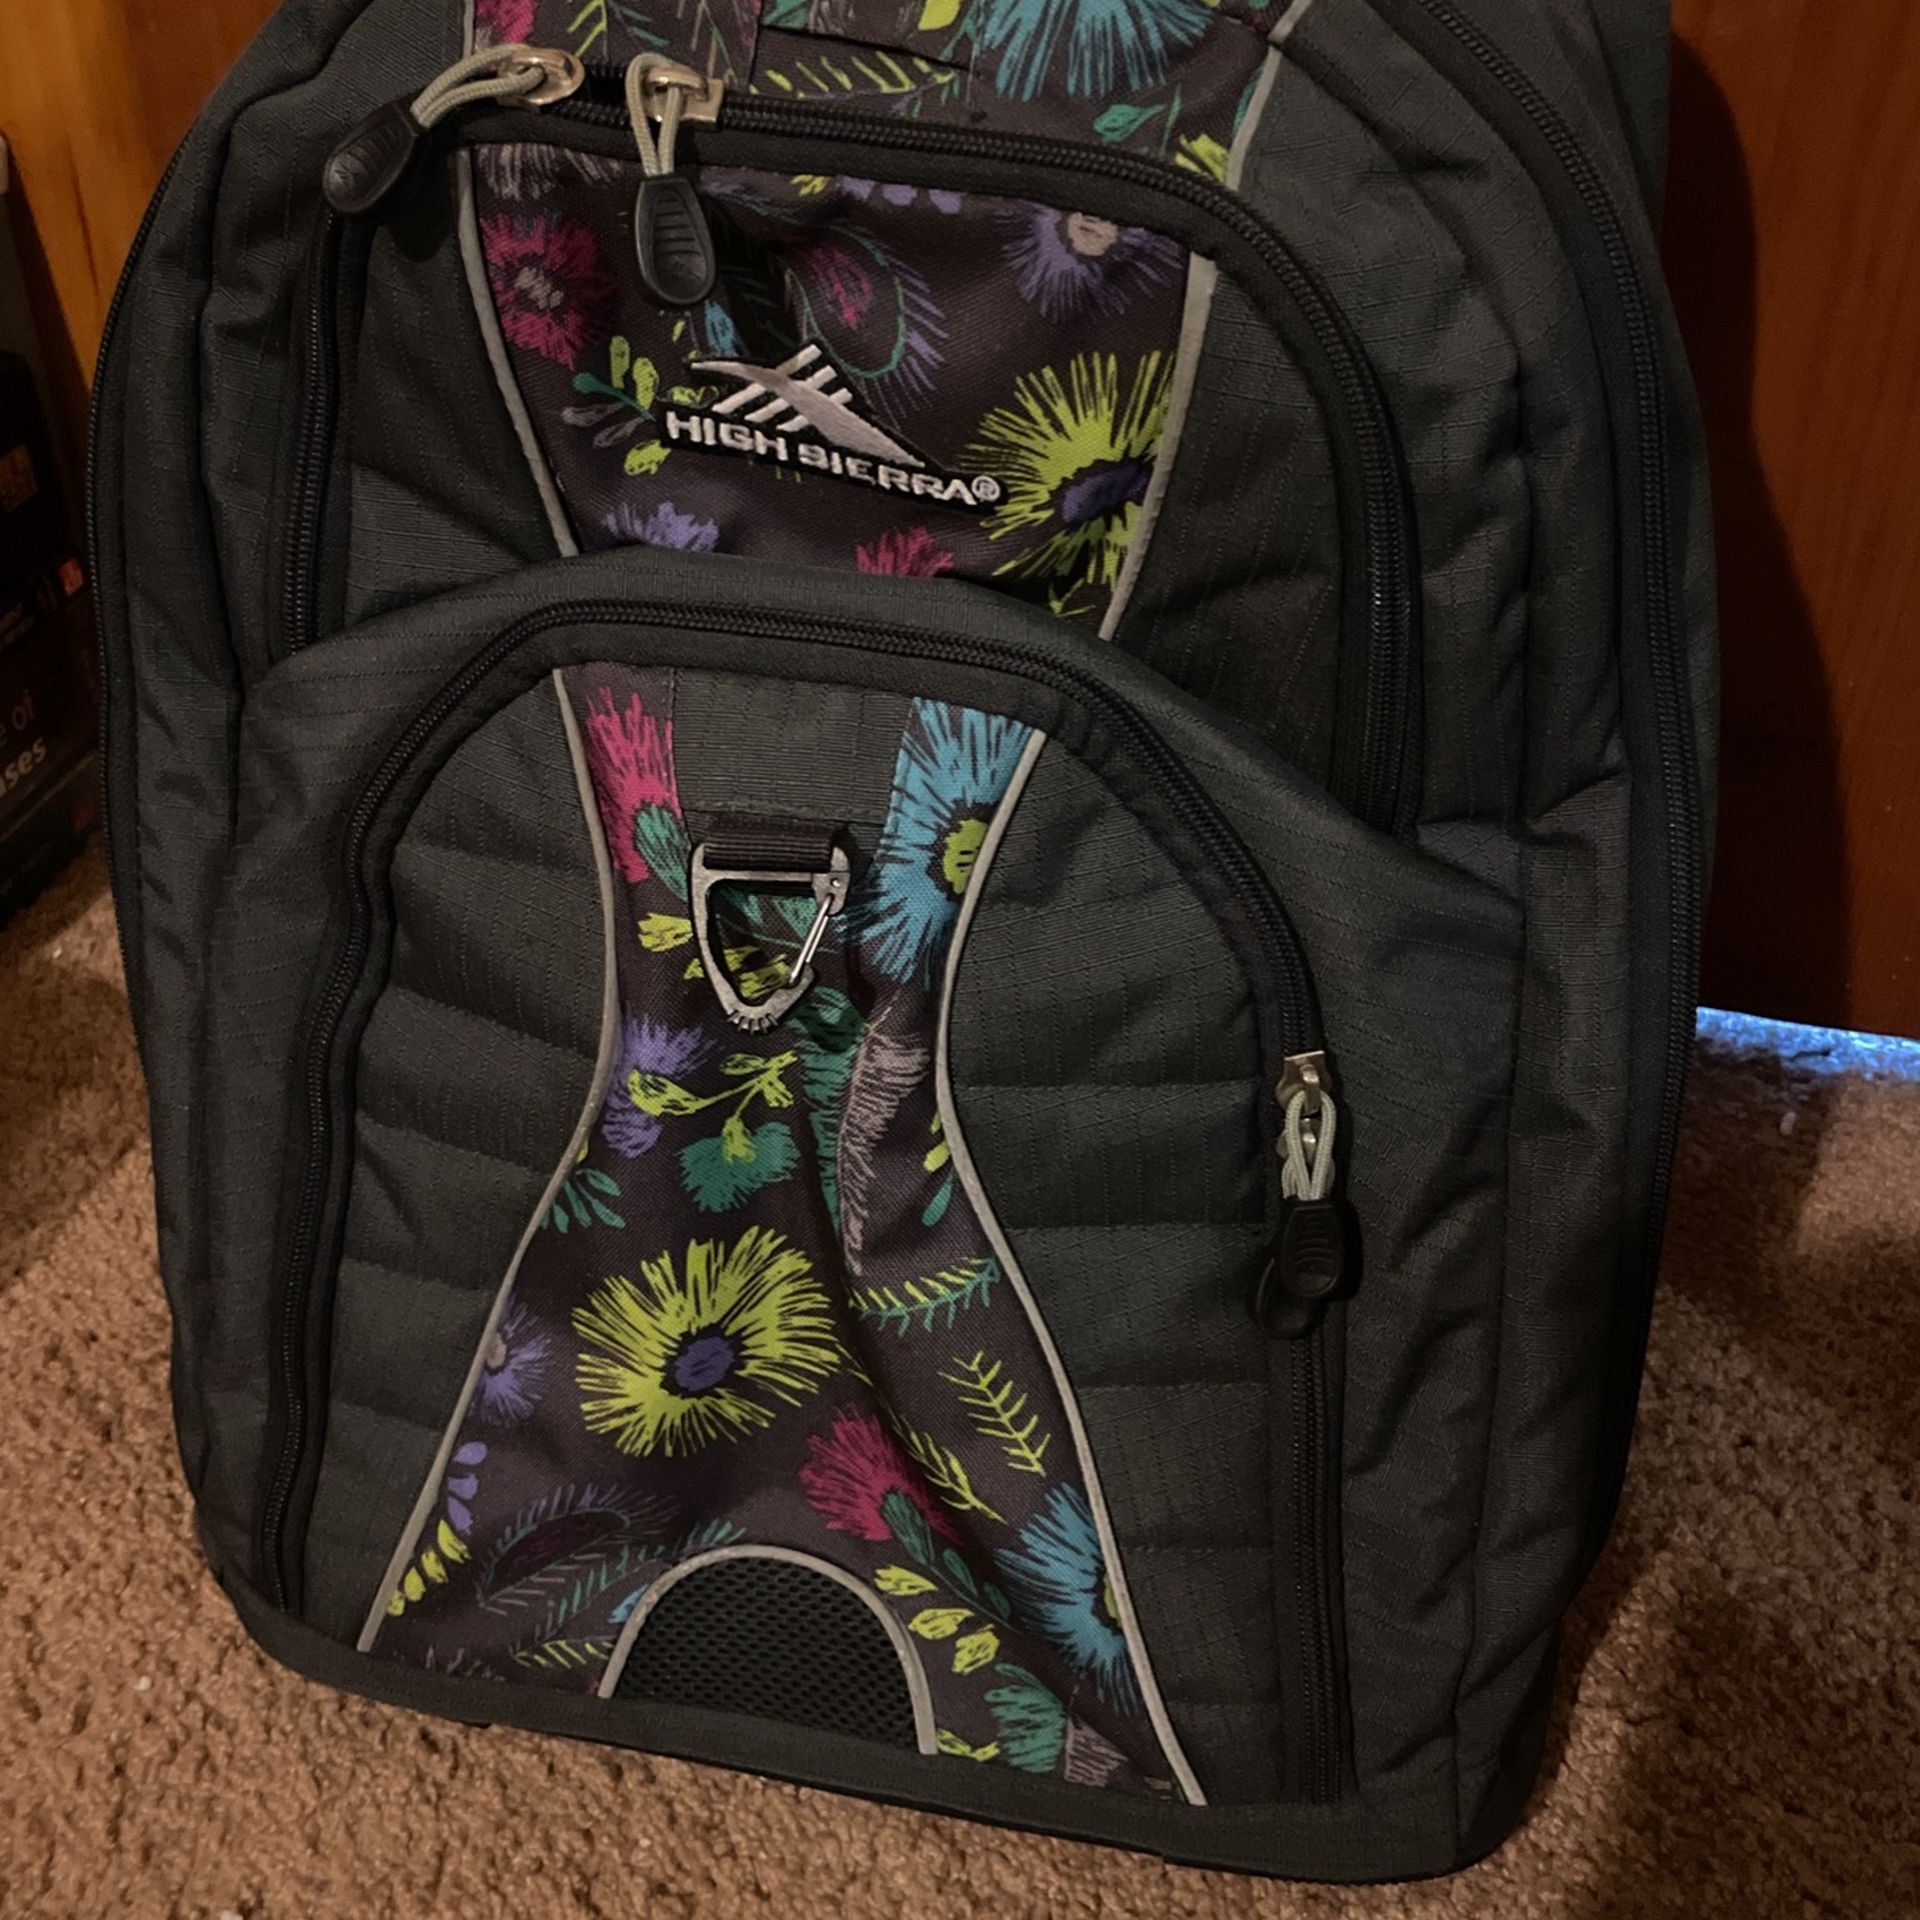 Backpack With Wheels Very Clean Heavy Duty $10